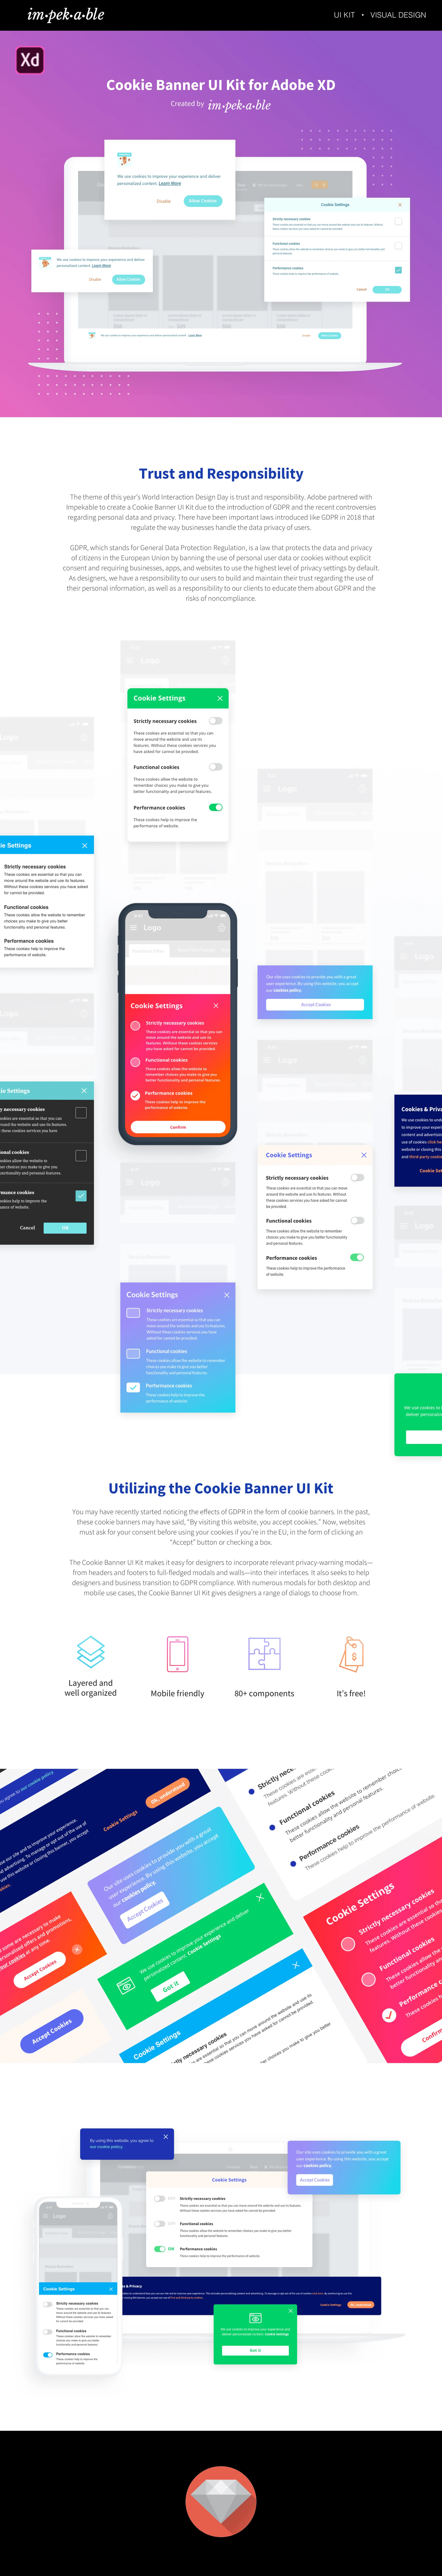 Cookie Banner UI Kit for Adobe XD - This UI kit makes it a cinch for designers to easily incorporate relevant privacy-warning modals into their interfaces. The kit includes numerous modals for both desktop and mobile uses cases, giving designers many choices for their projects.